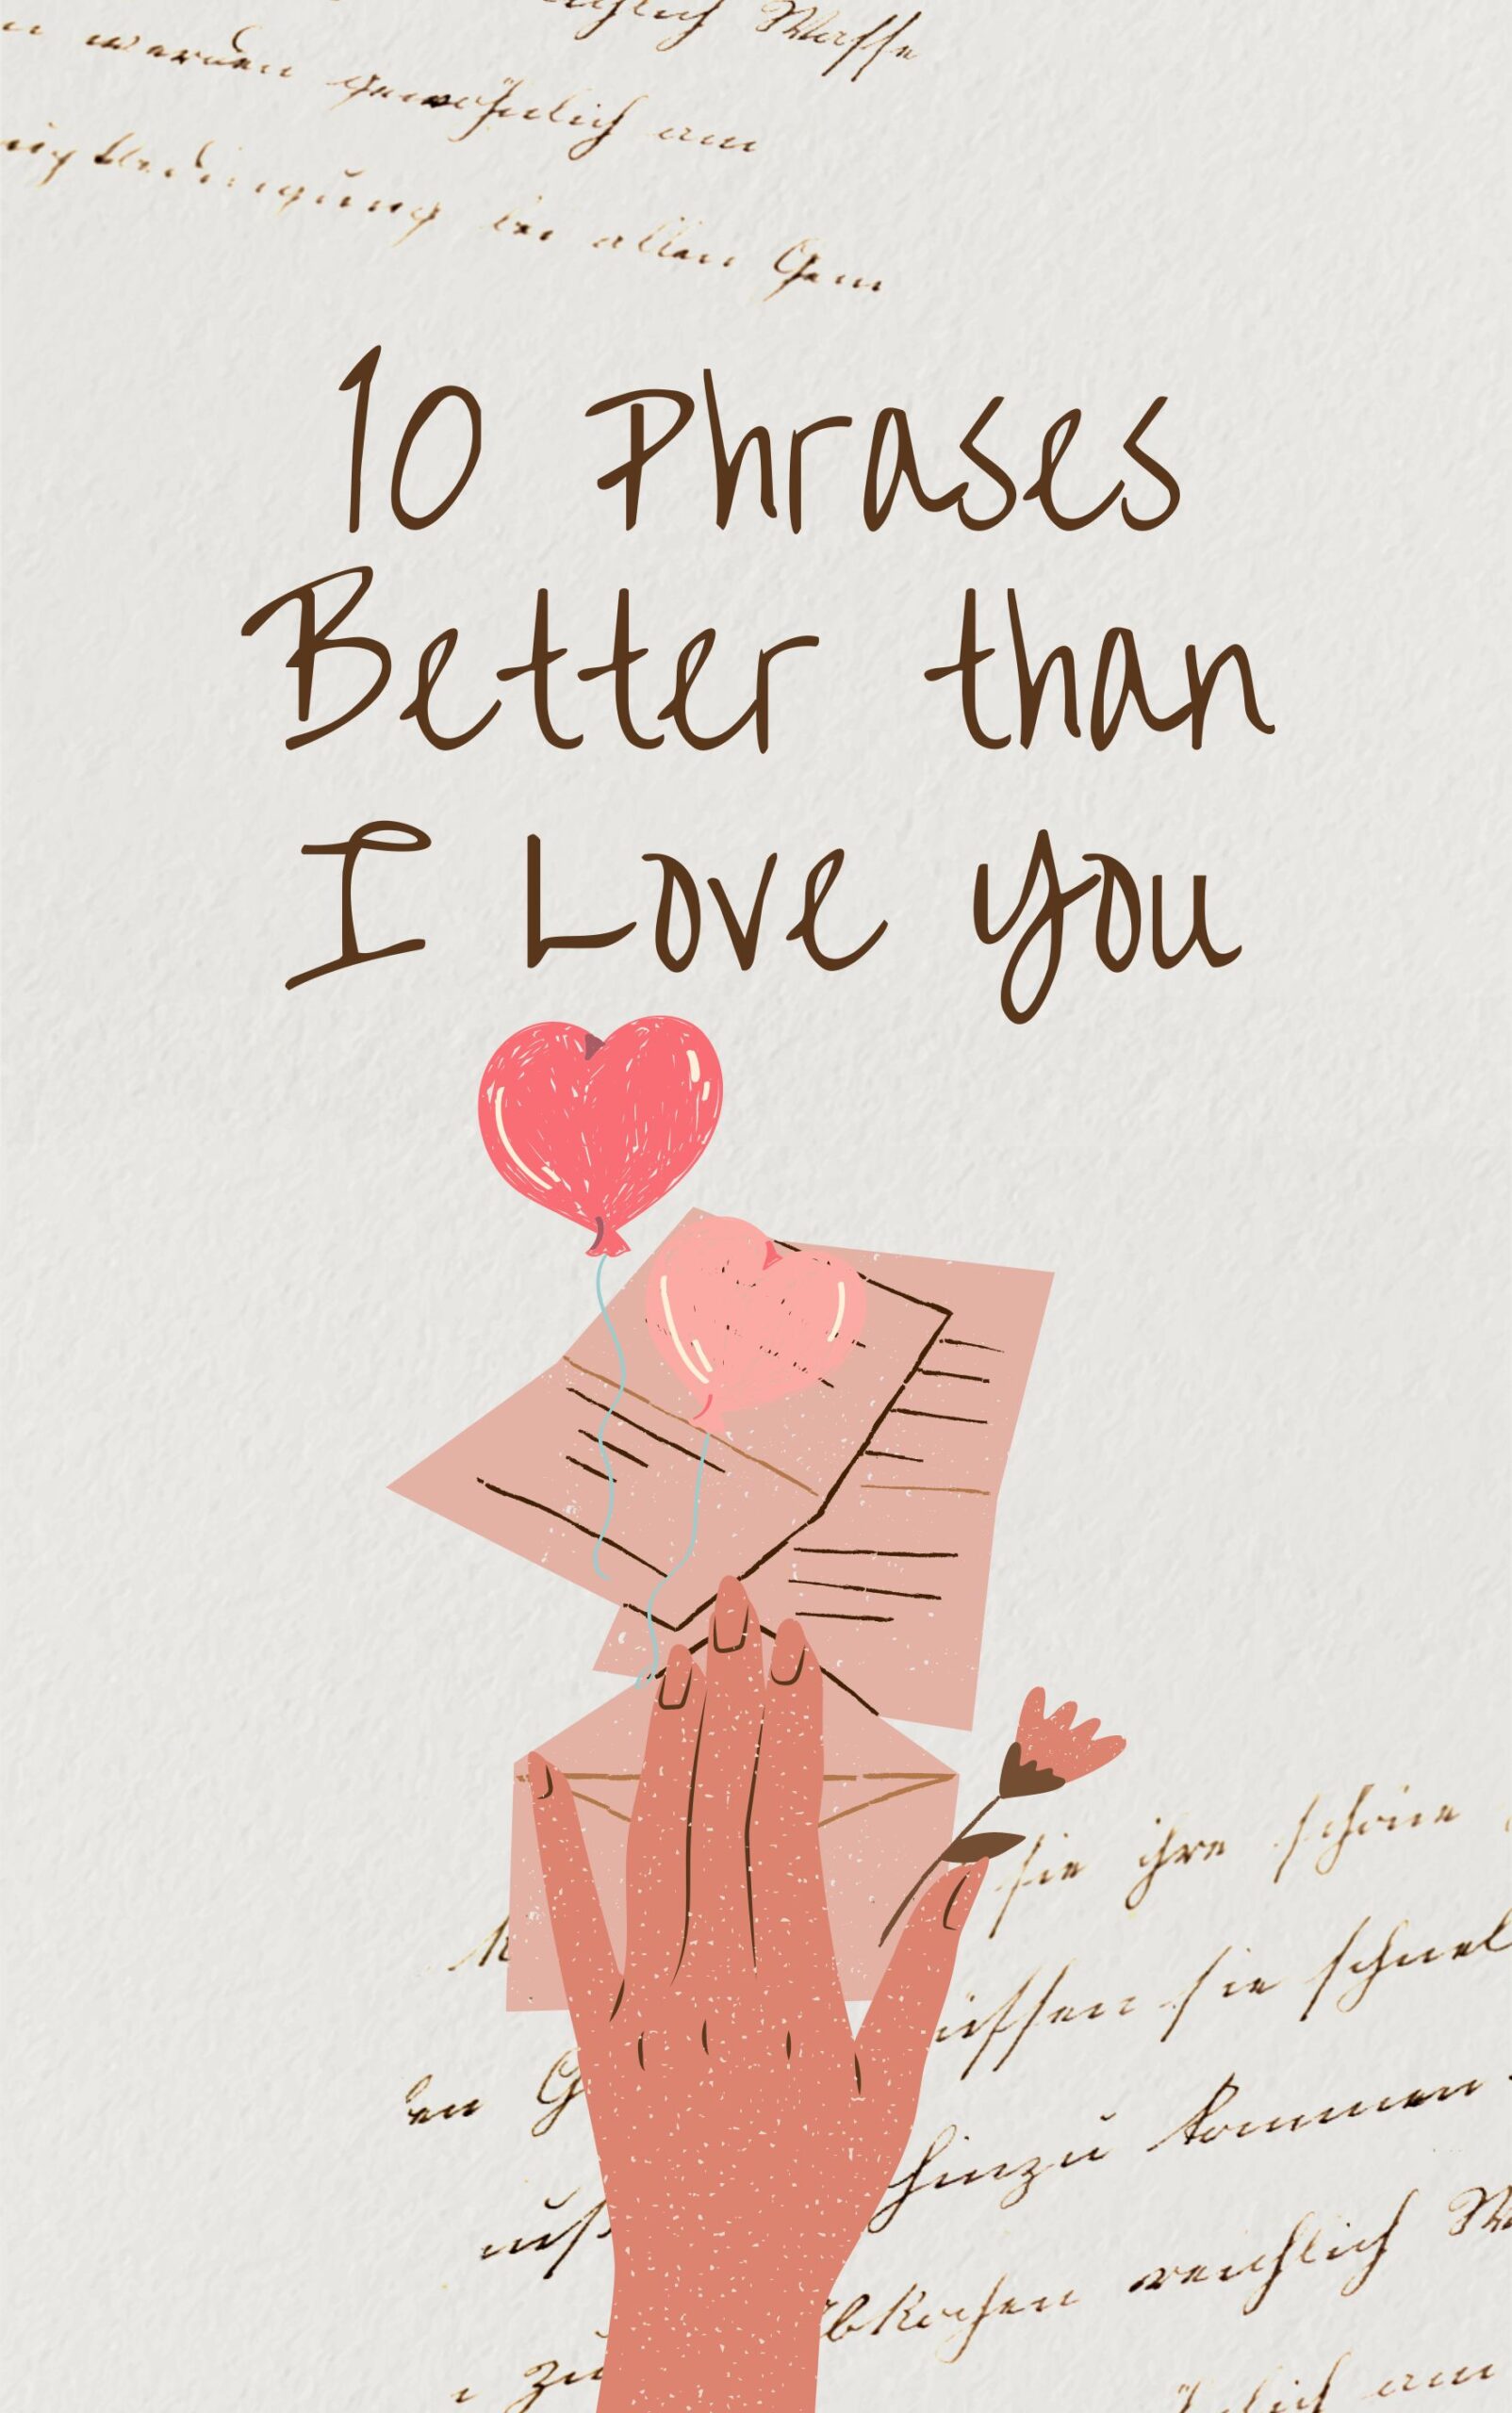 10 Phrases Better than I Love you